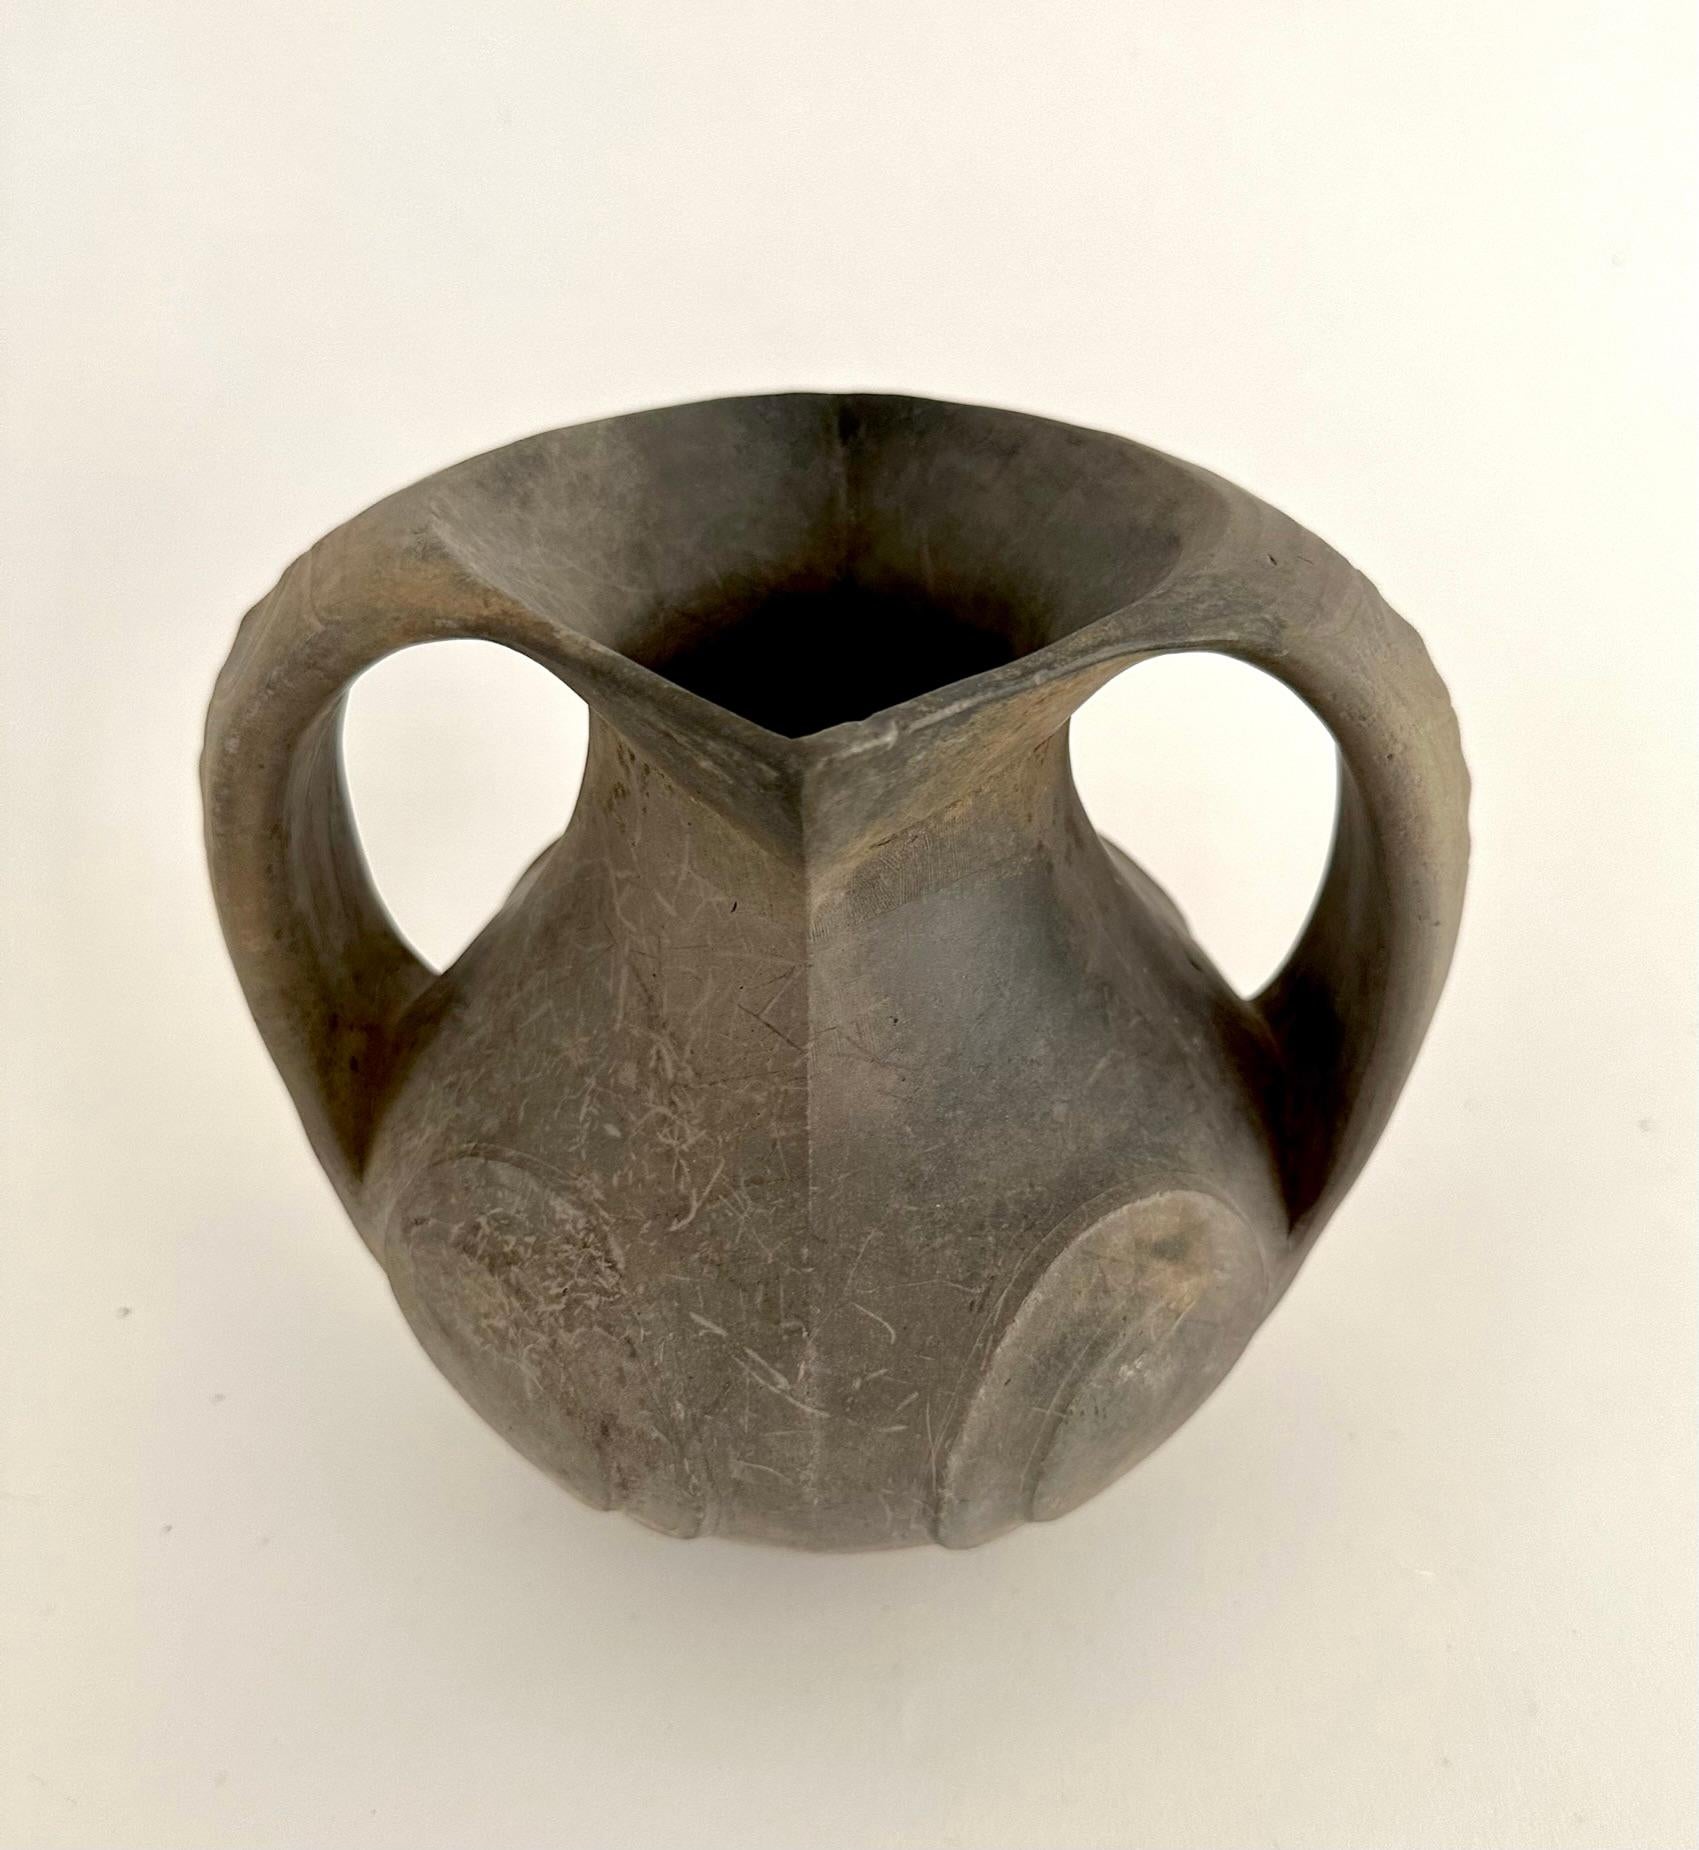 This amphora pot was made some 2,000 years ago during the Han Dynasty (206 BC - AD 220).  This vase is pear form with a vertically incised band around the neck beneath a lozenge-shaped opening at the mouth and the two loop handles, each finished